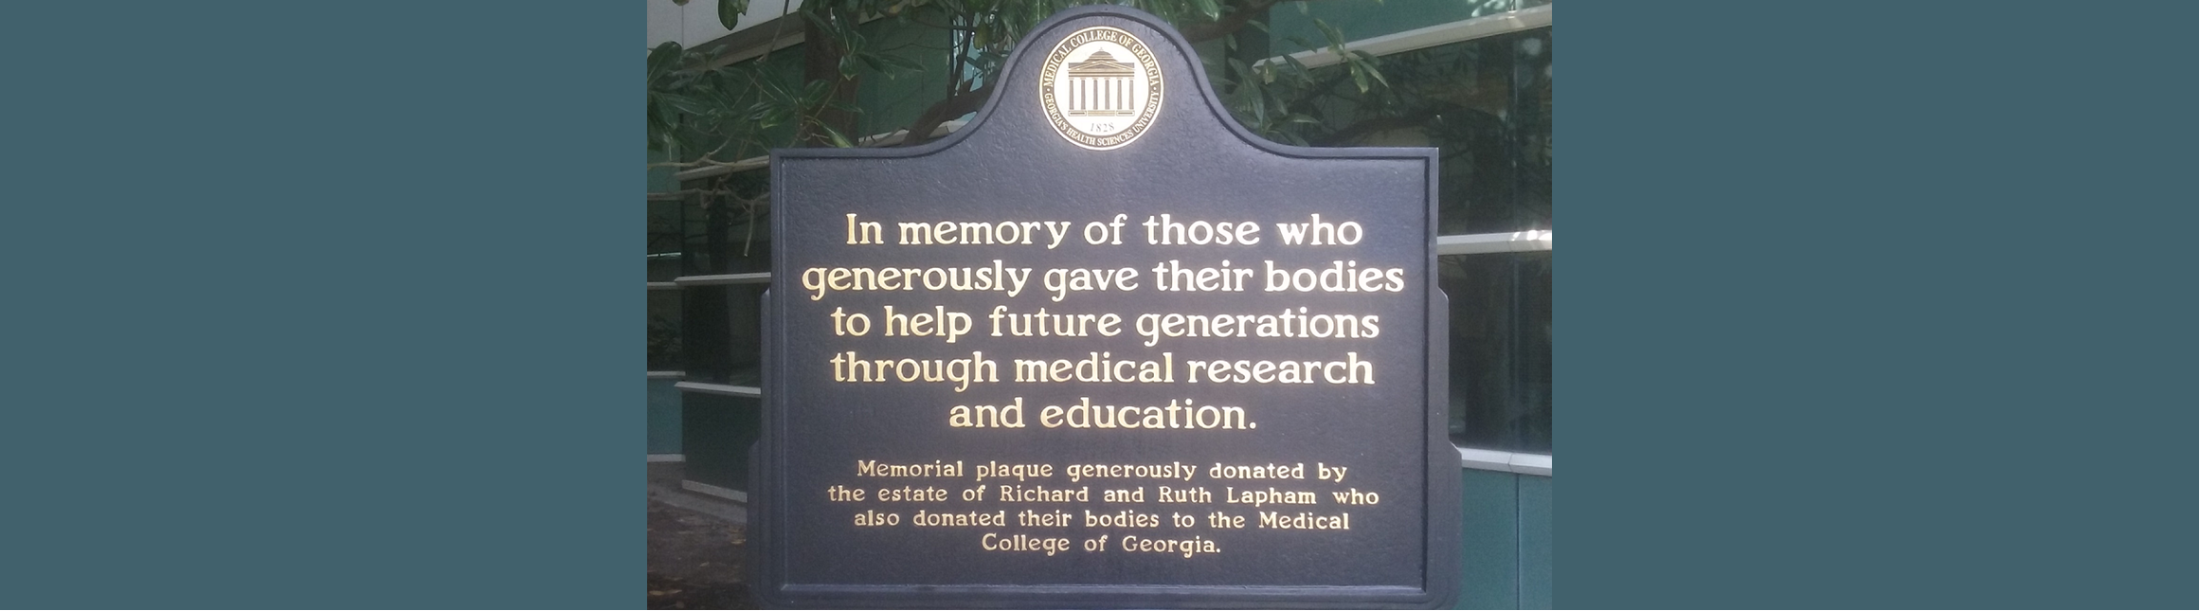 Plaque with MCG logo that reads: "In memory of those who generously gave their bodies to help future generations through medical research and education. Memorial plaque generously onated by the estate of Richard and Ruth Lapham who also donated their bodies to the Medical College of Georgia."